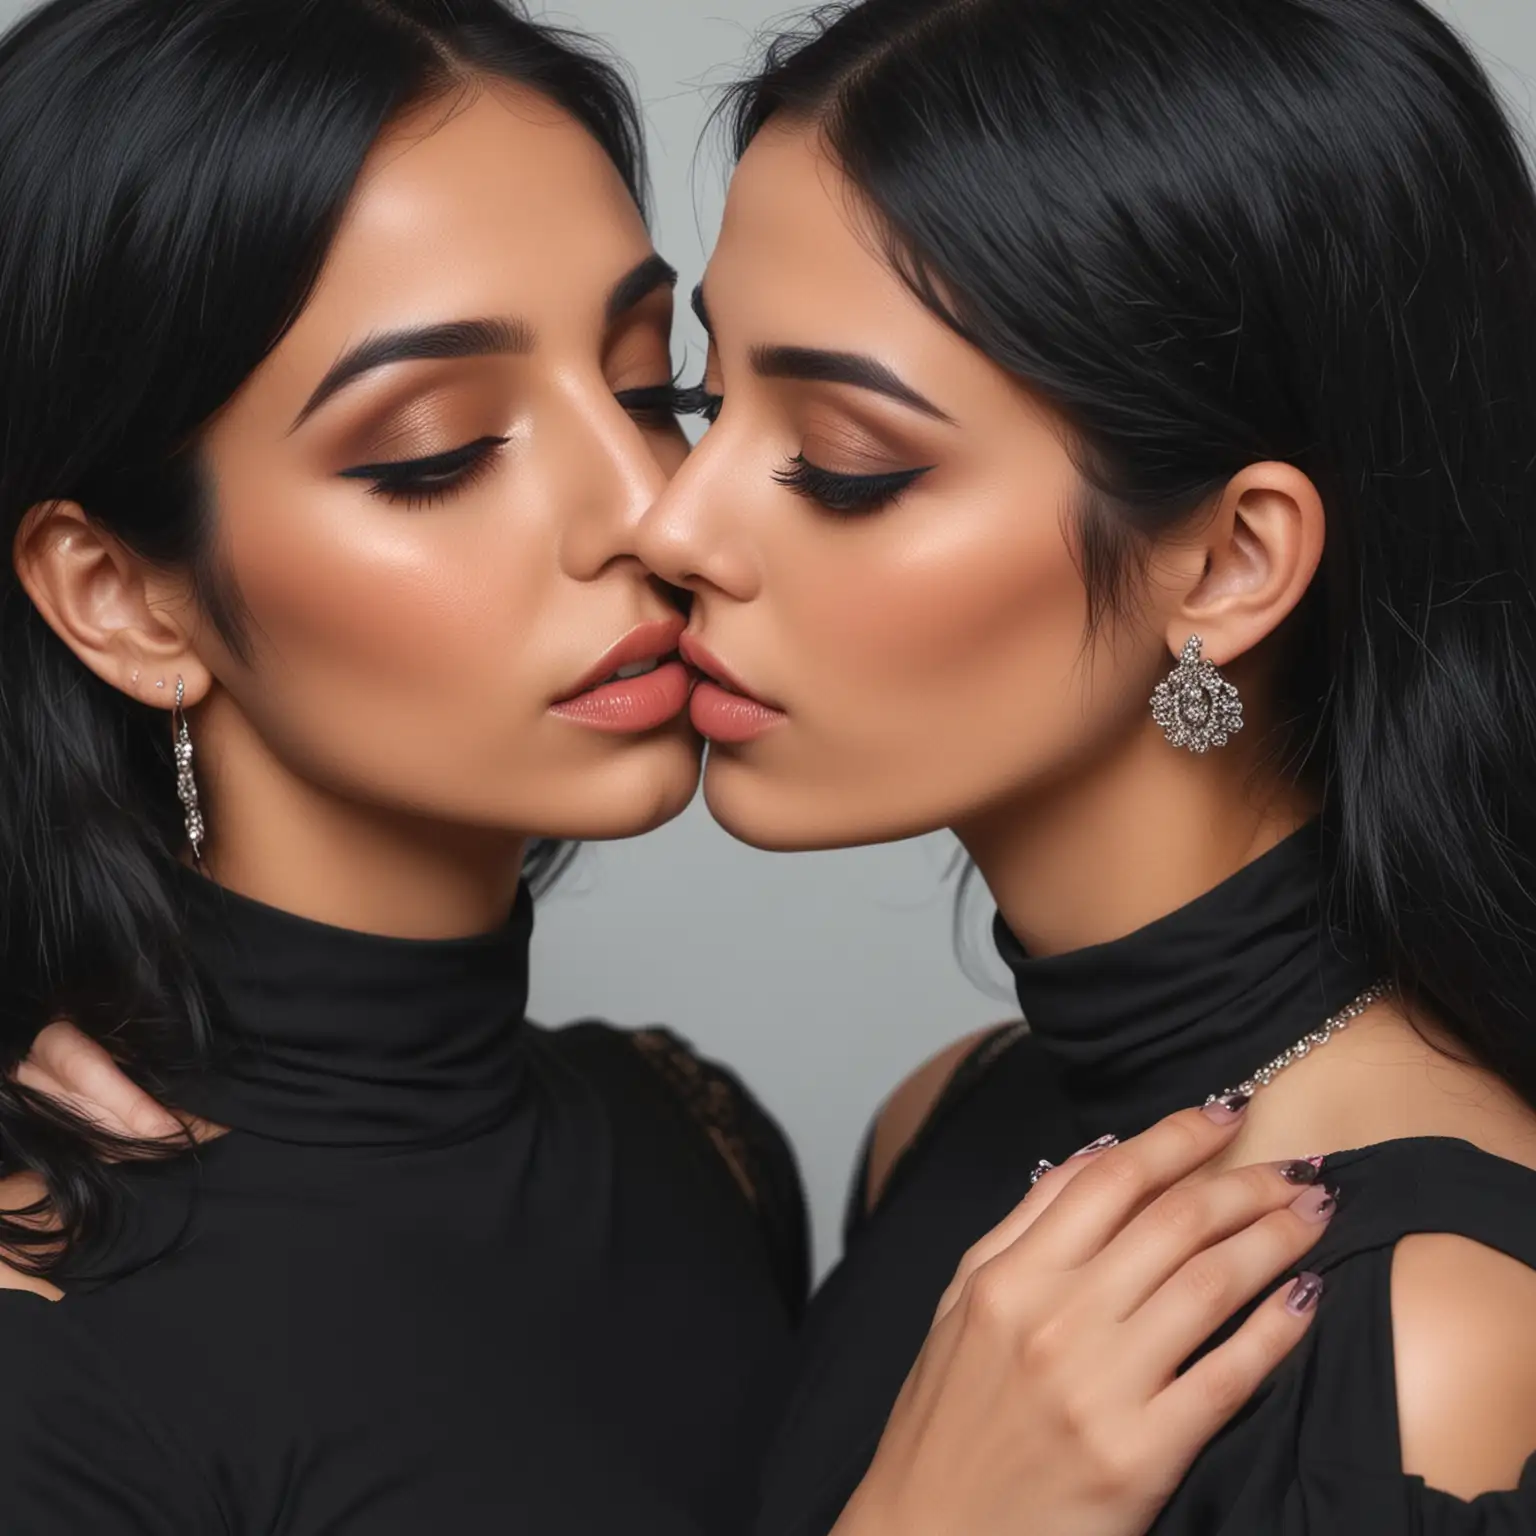 Iranian two hot girls, best makeup, wearing black dress, black hair, (neck and shoulder kissing), ultra realistic, portrait picture in 4k resolution